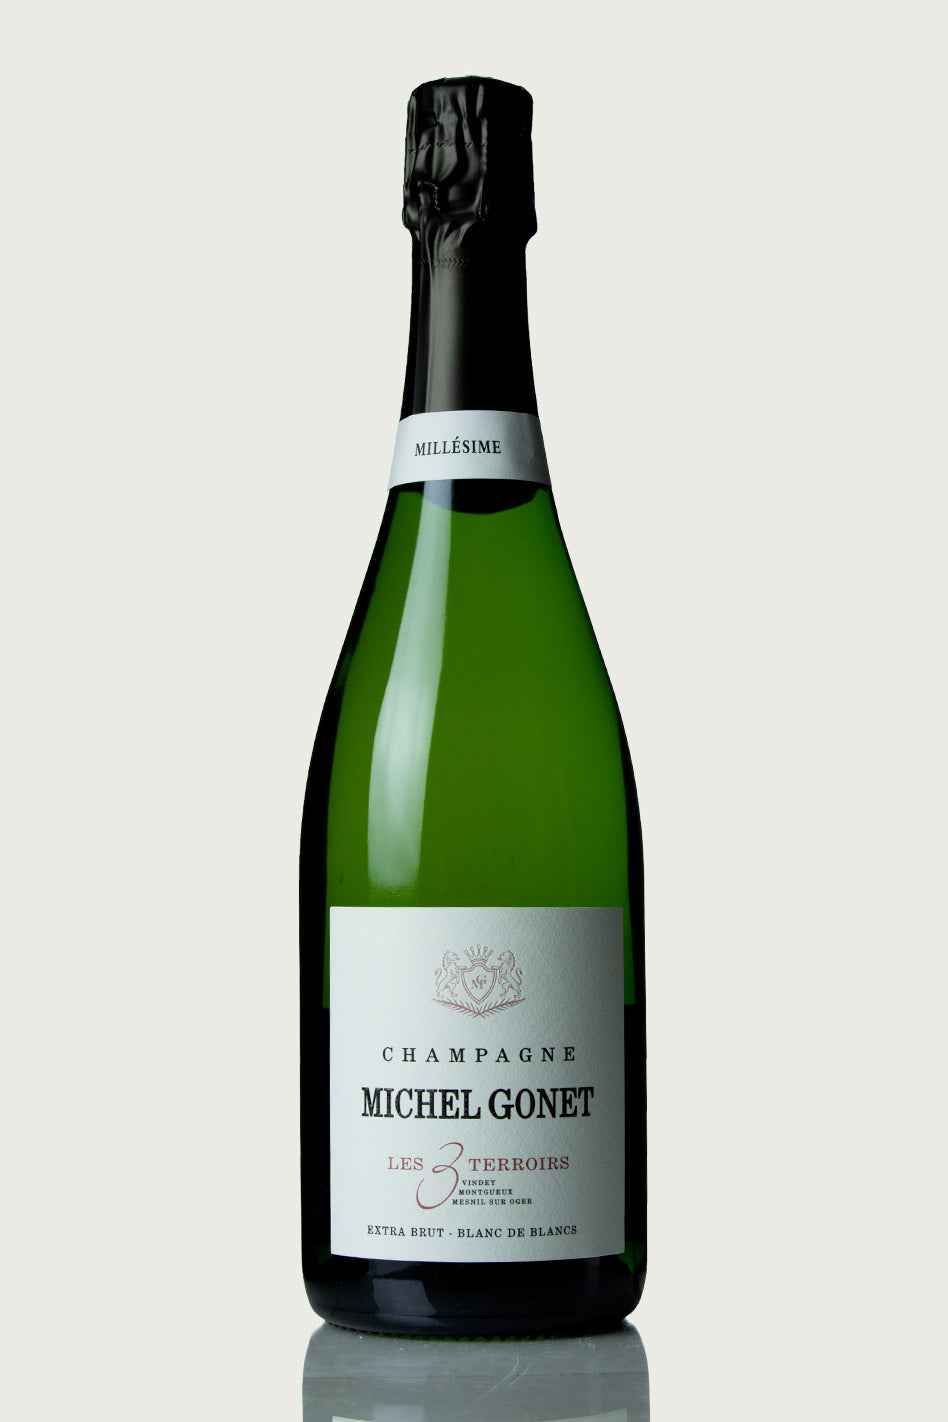 Michel Gonet Champagne '3 Terroirs' Extra Brut 2018